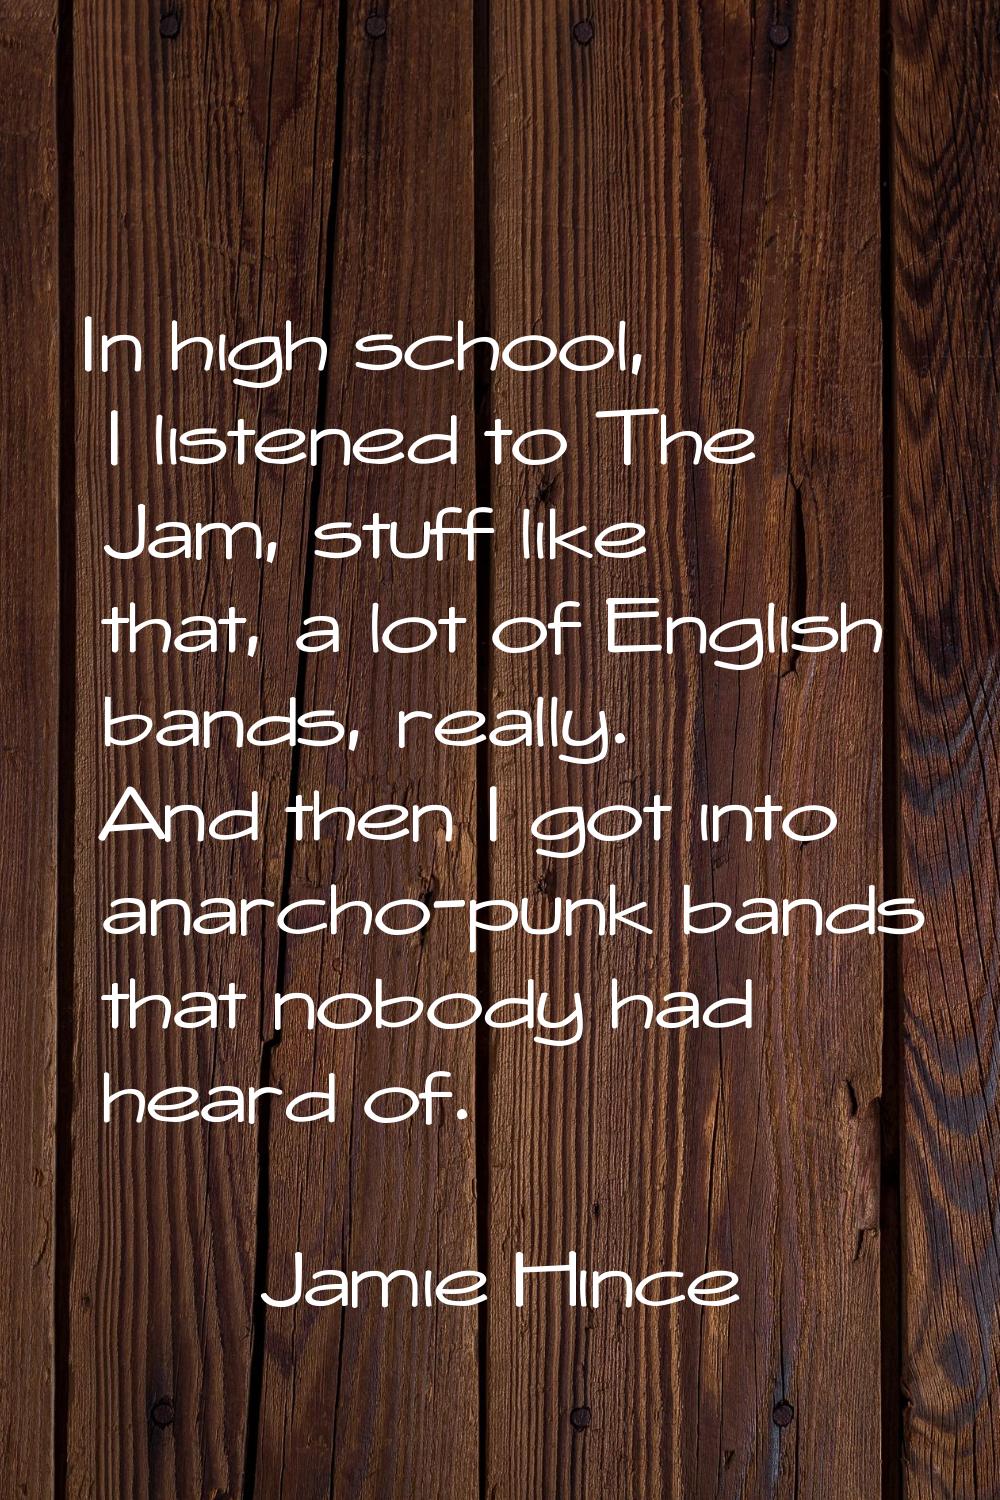 In high school, I listened to The Jam, stuff like that, a lot of English bands, really. And then I 